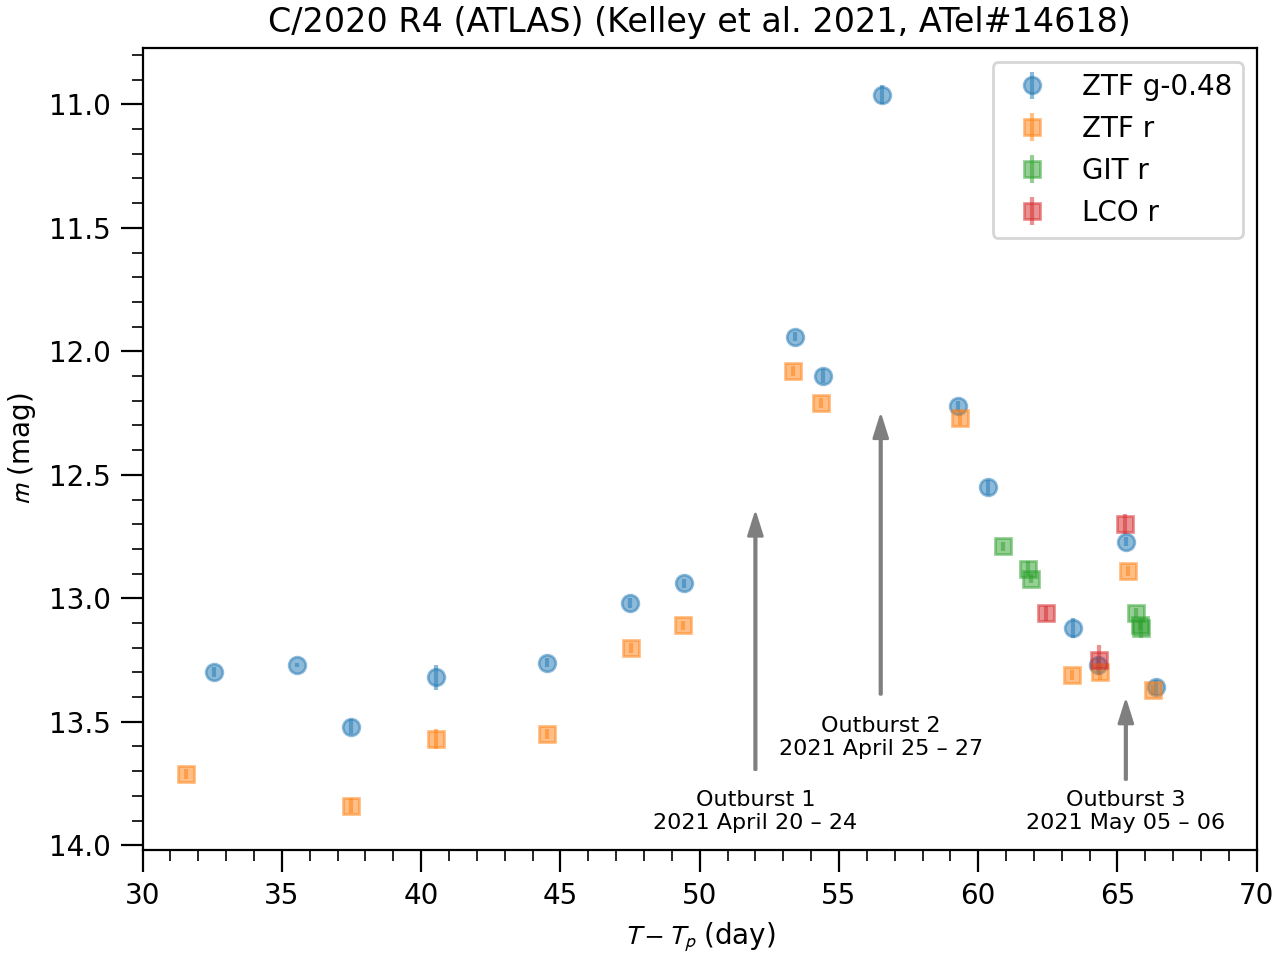 C/2020 R4 (ATLAS) outbursts, April/May 2021